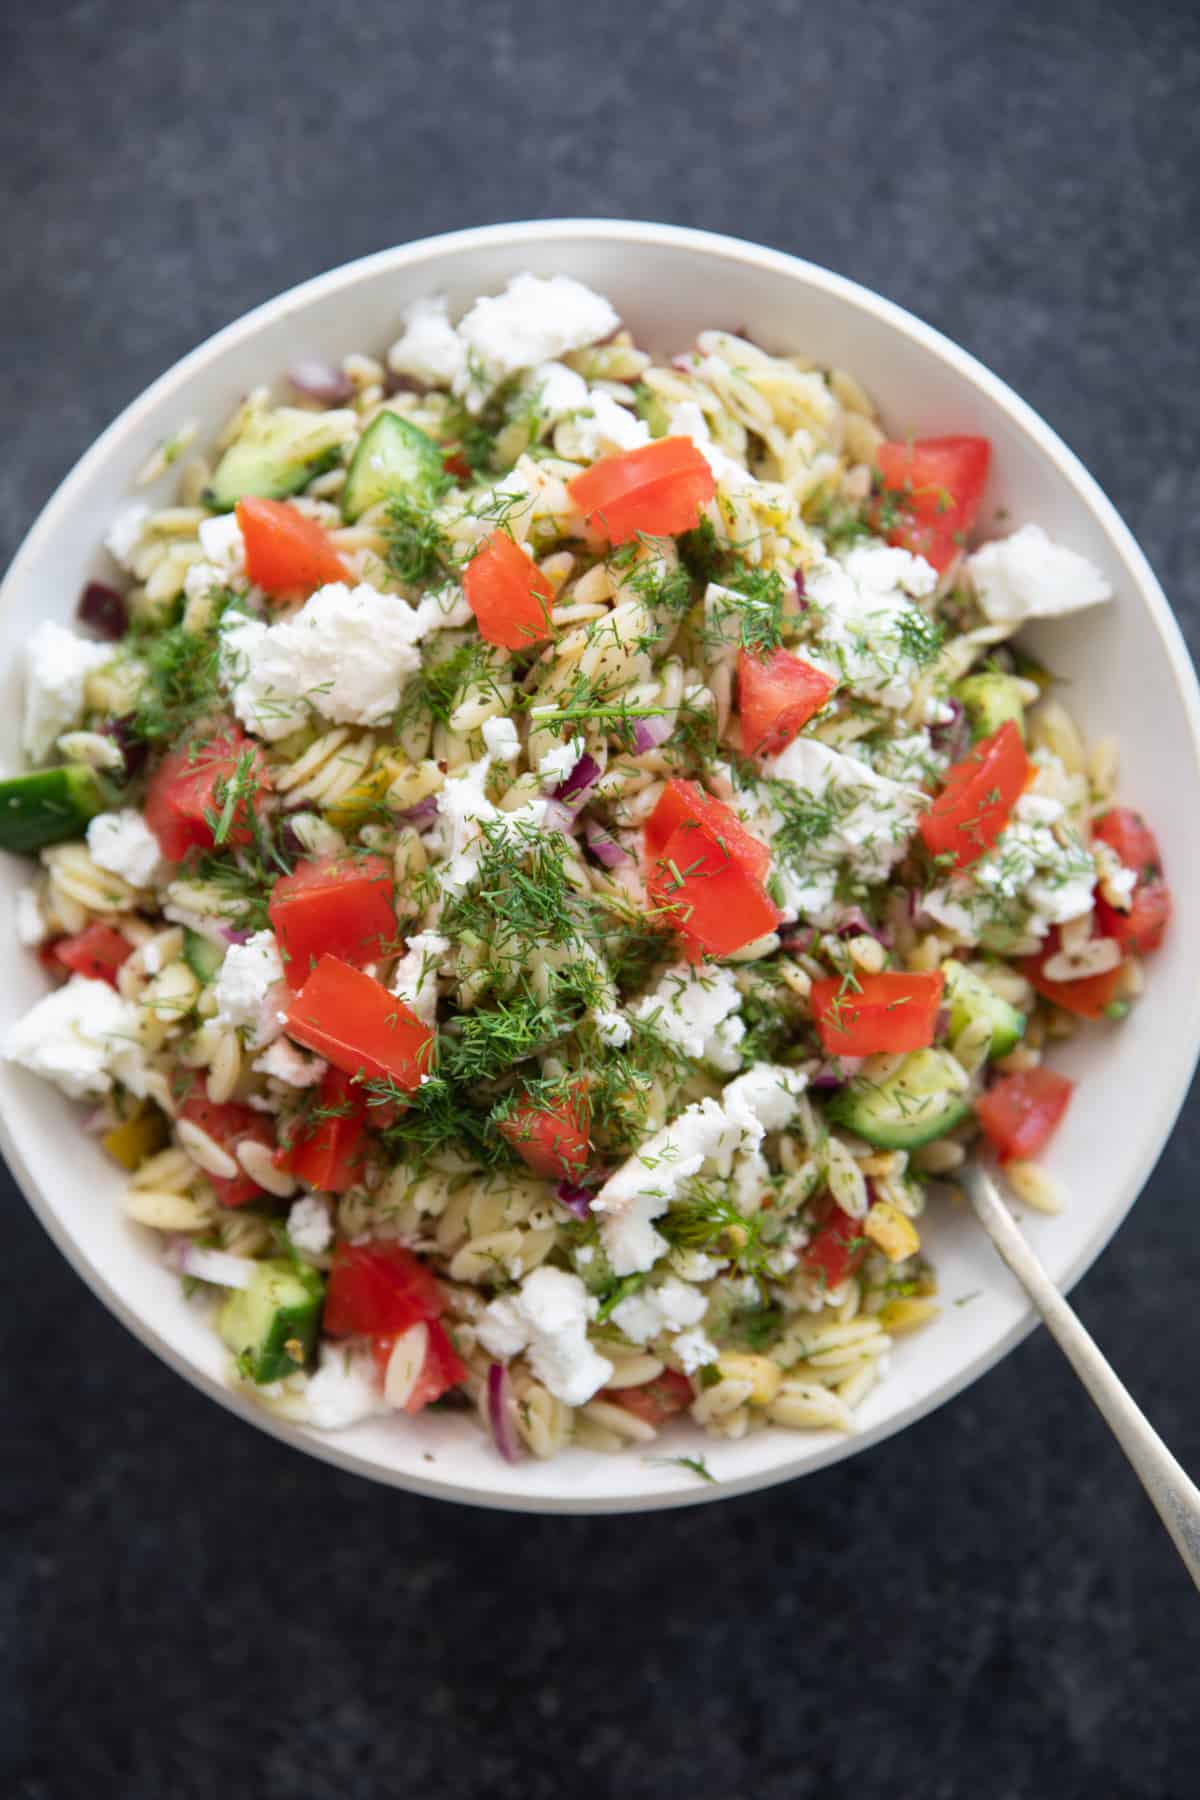 You can add tomatoes to the orzo salad if desired.